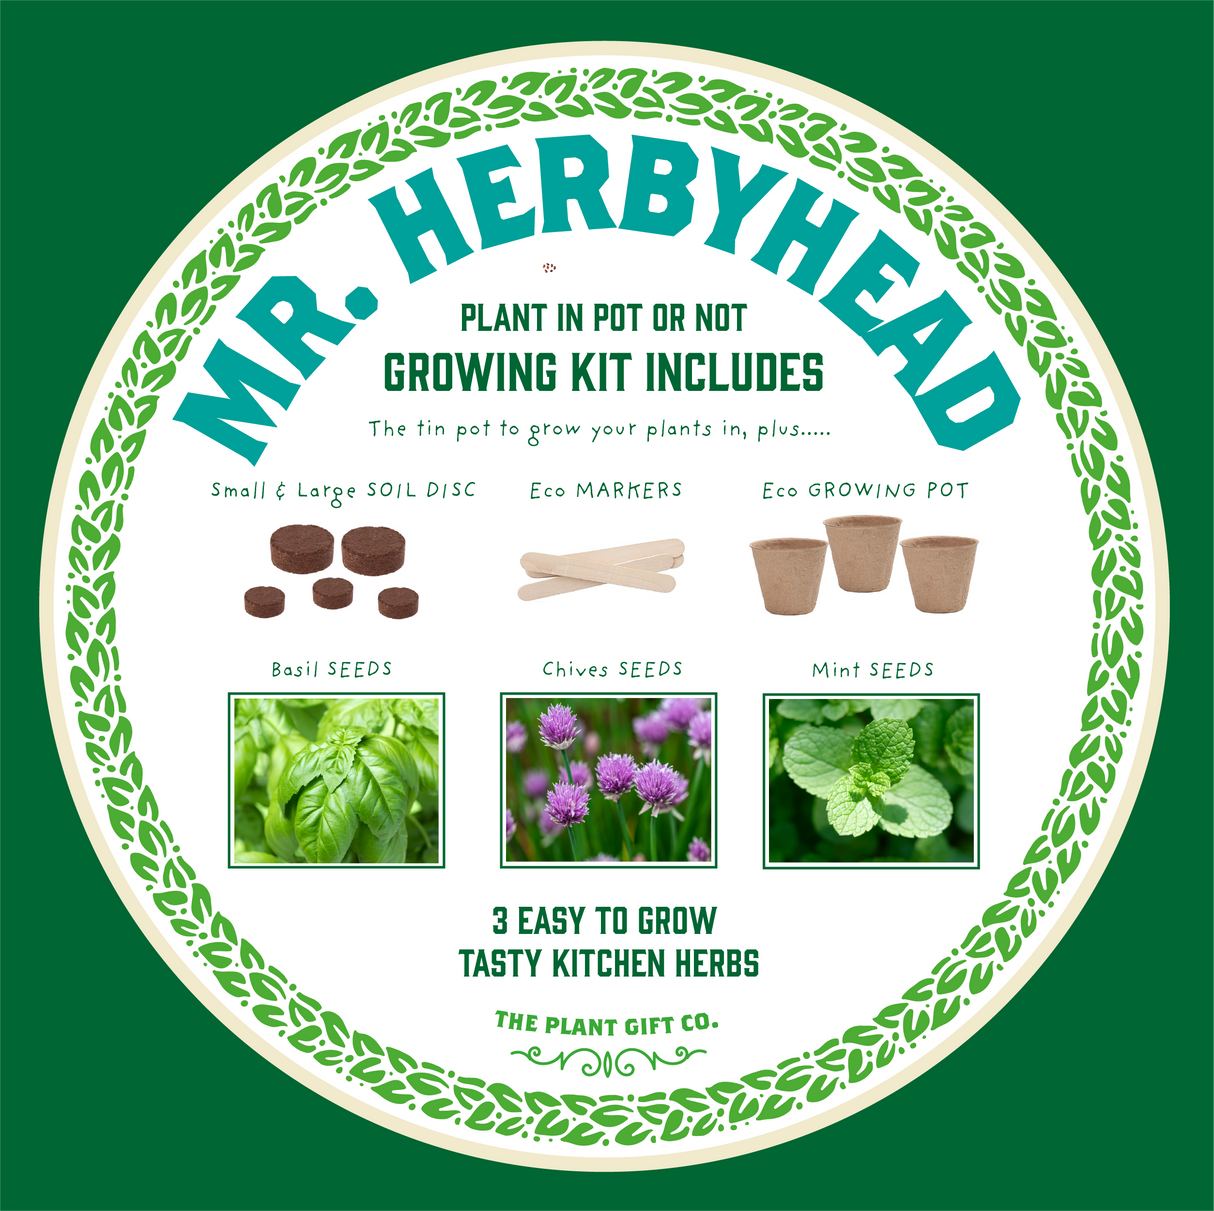 Mr. Herbyhead. Eco Grow Your Own Plant Kit, Gardening Gift.